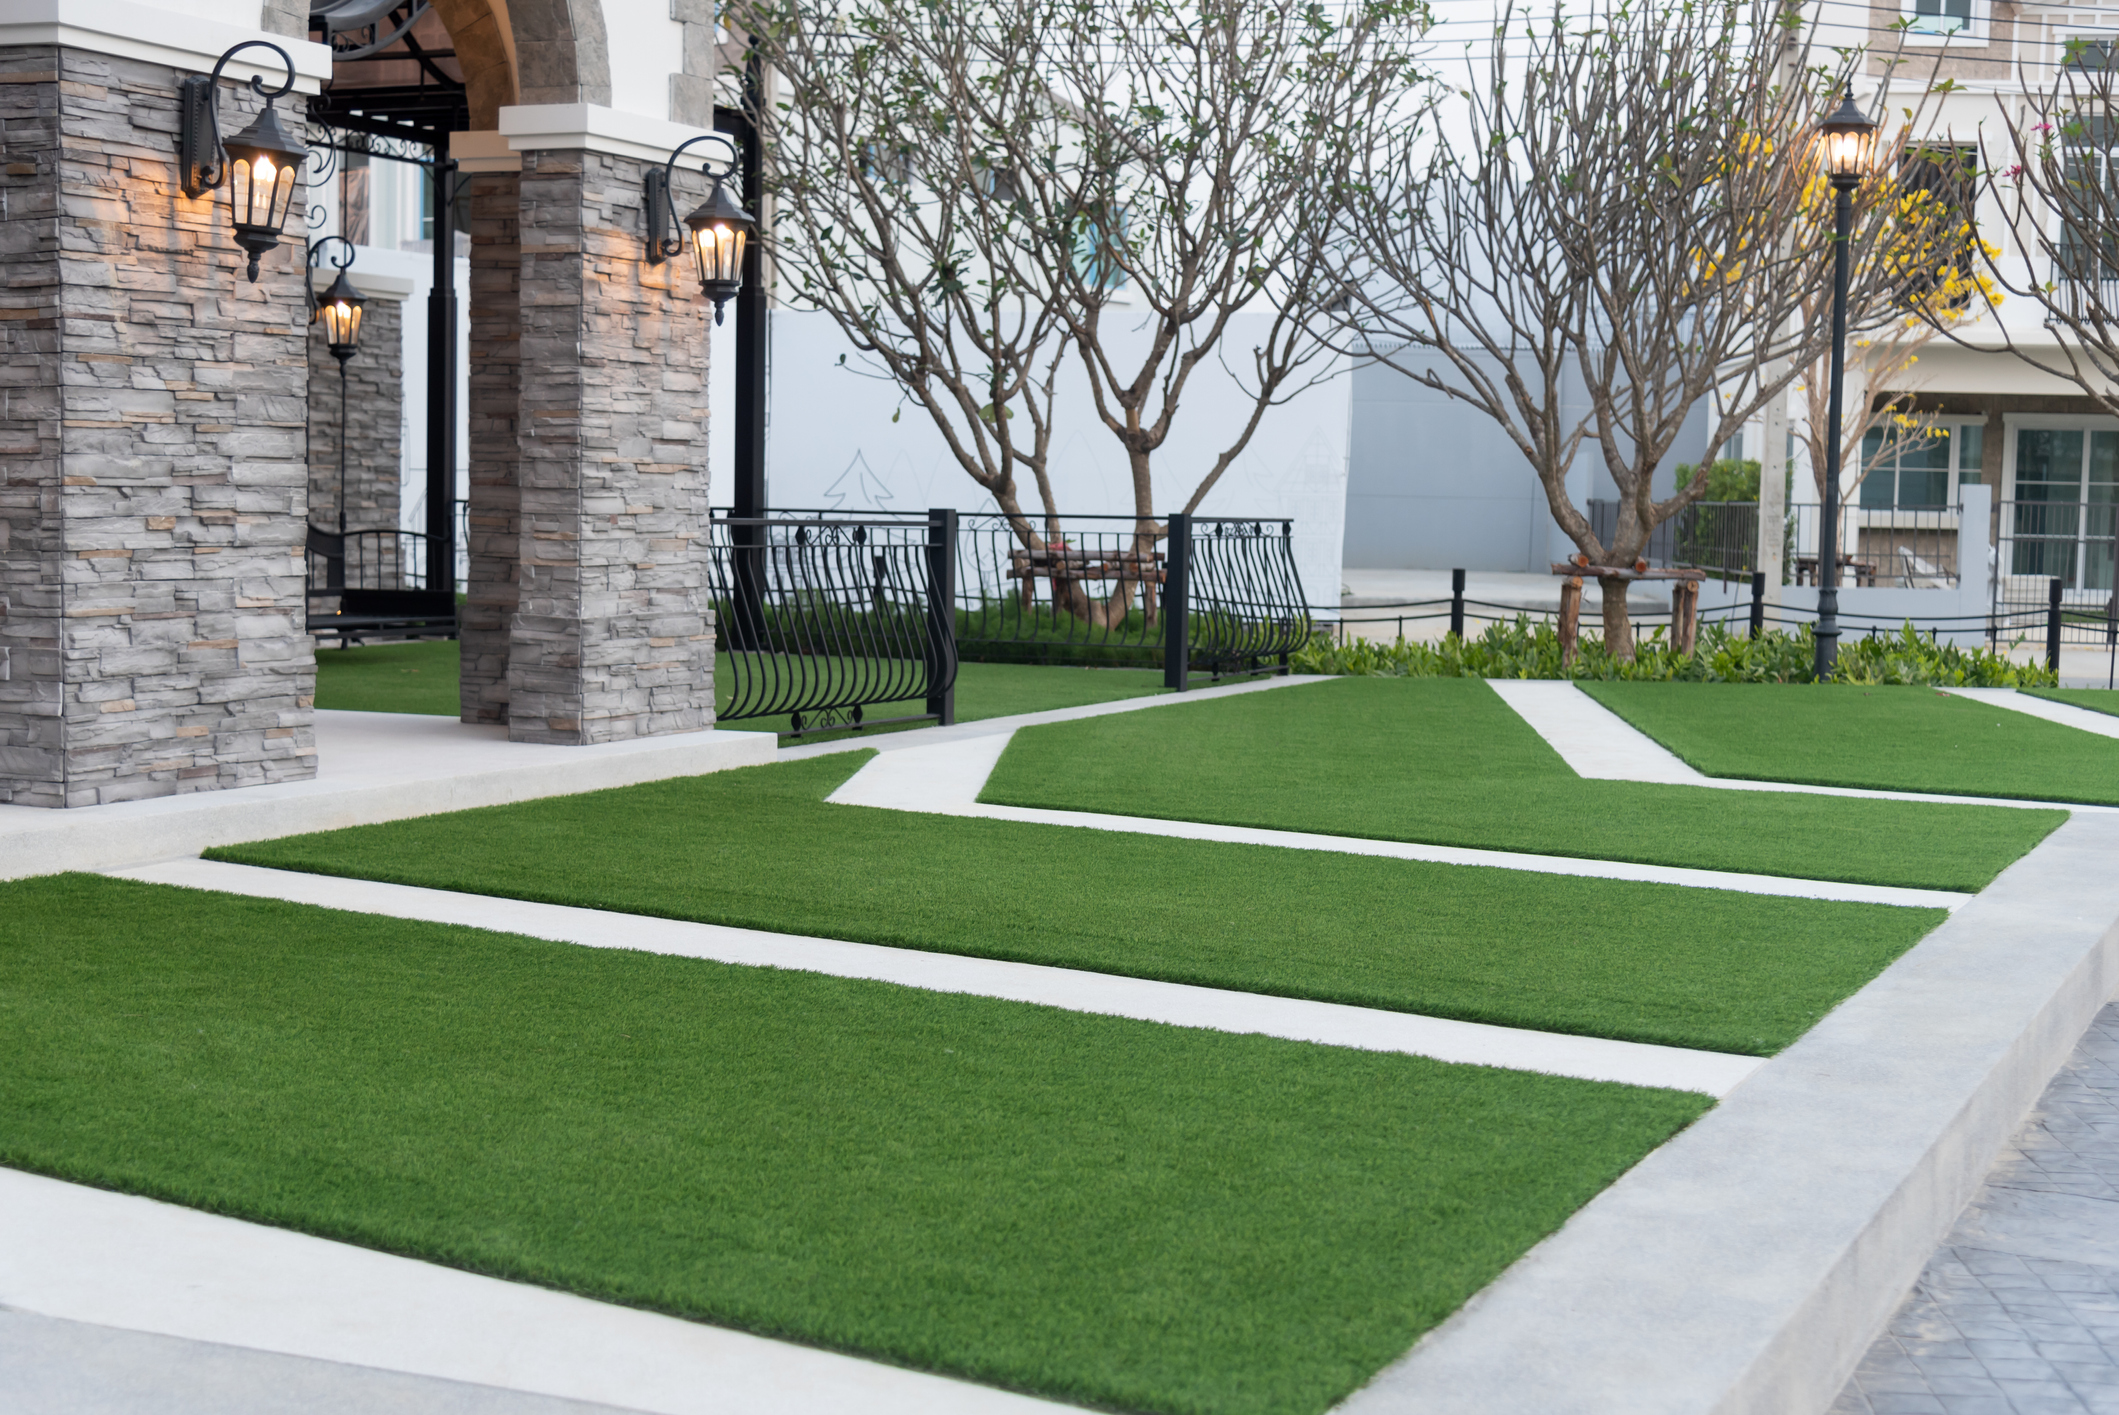 Artificial turf in a community area.